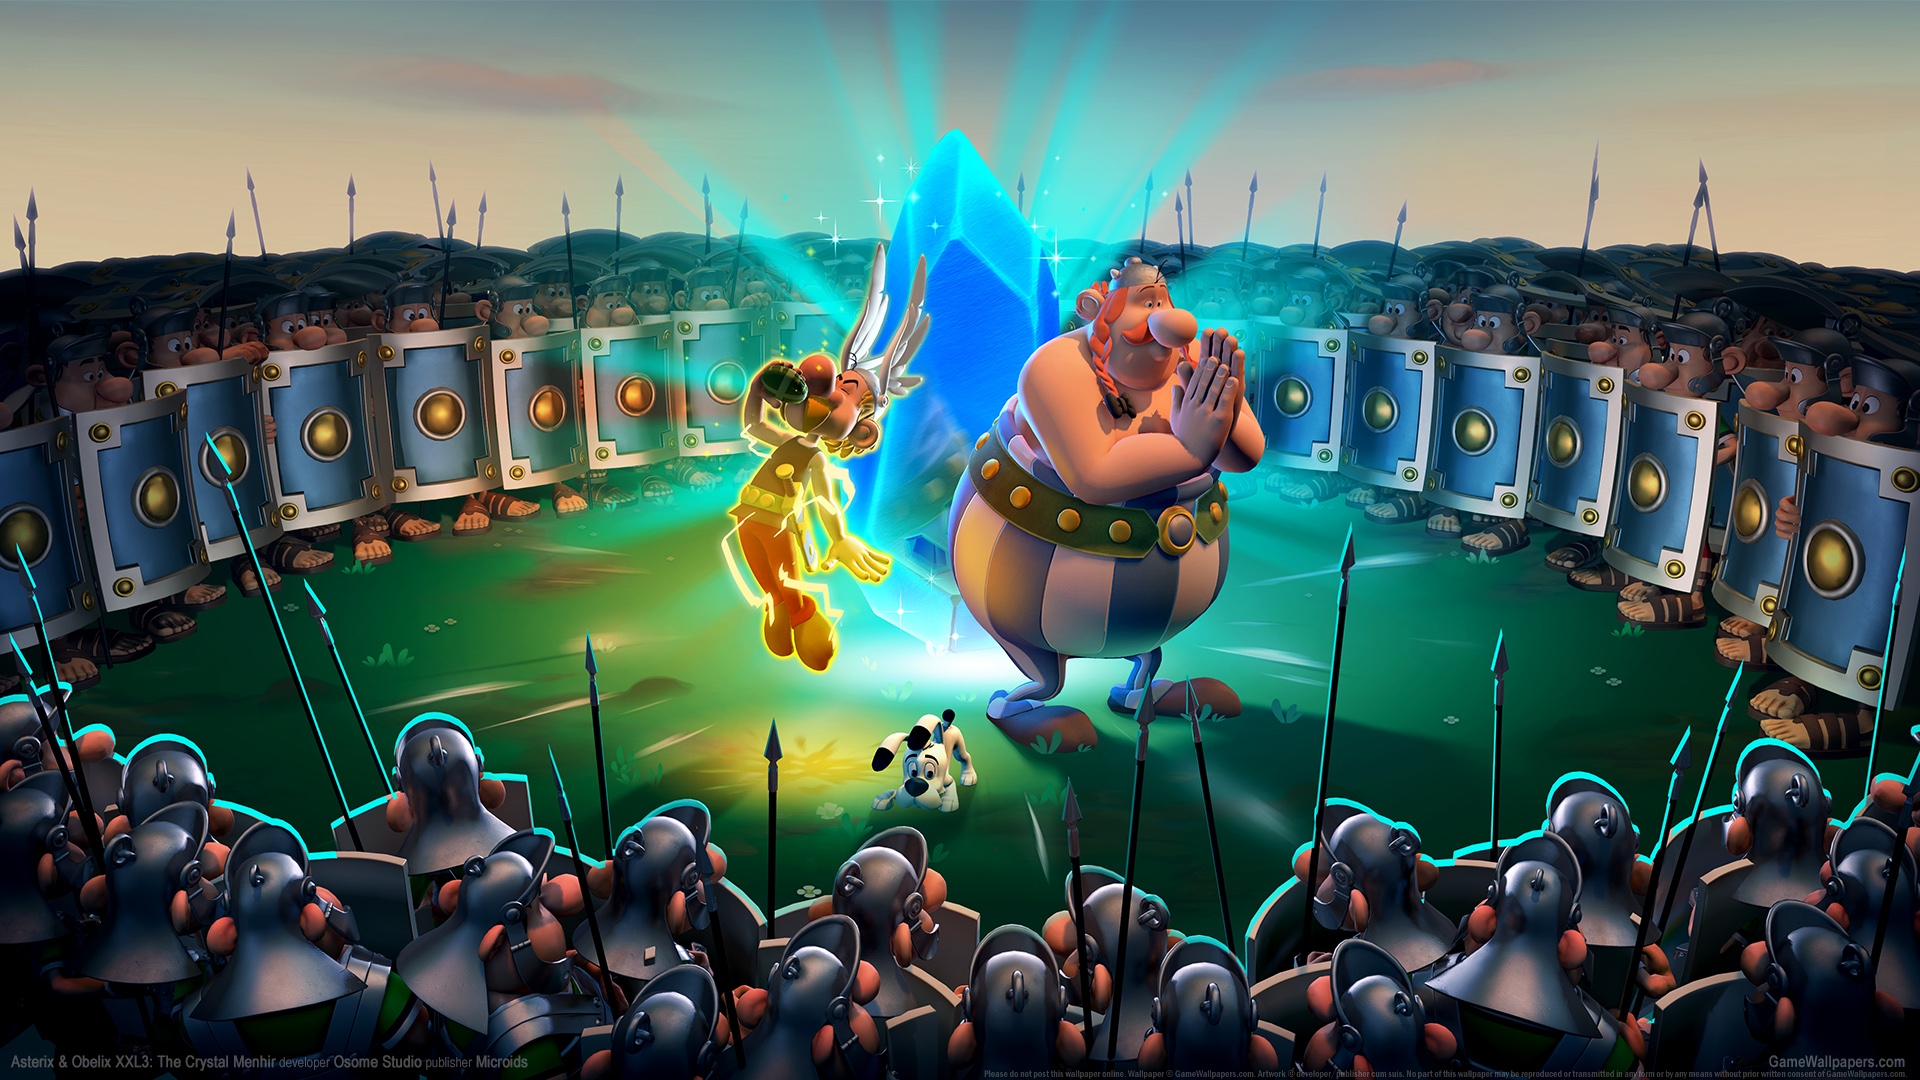 Asterix & Obelix XXL3: The Crystal Menhir 1920x1080 wallpaper or background 01